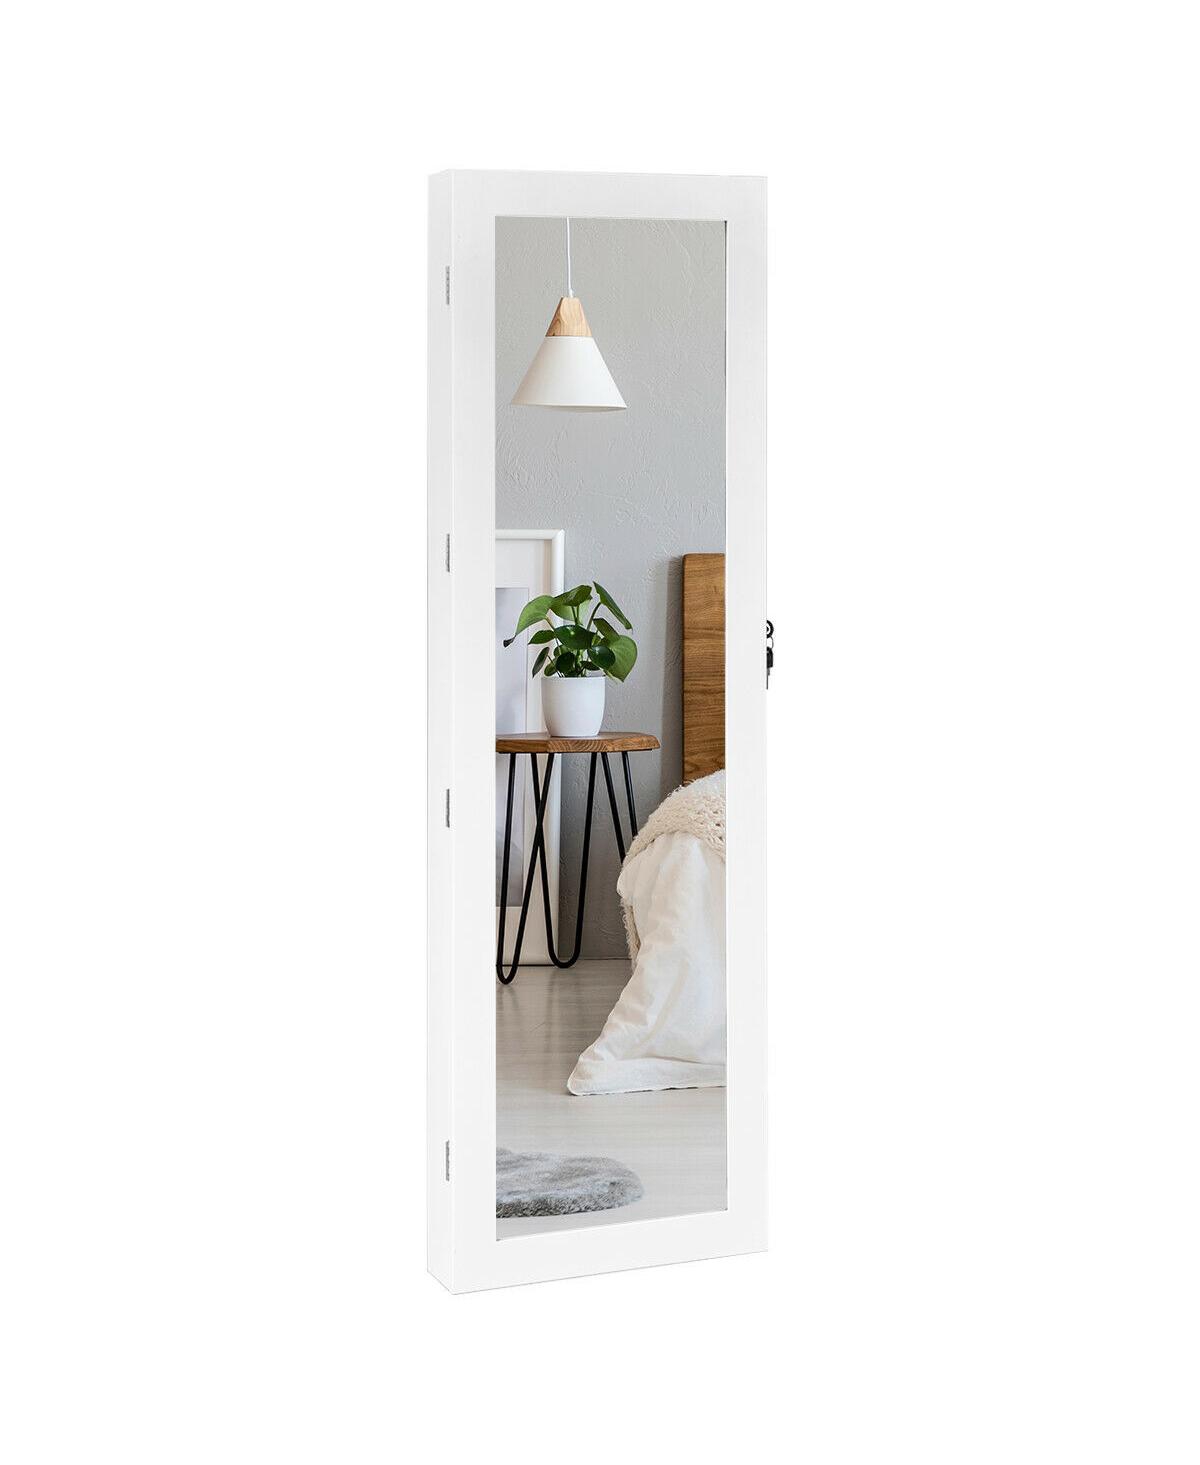 Wall Mounted Lockable Mirror Jewelry Cabinet with Led Light - White